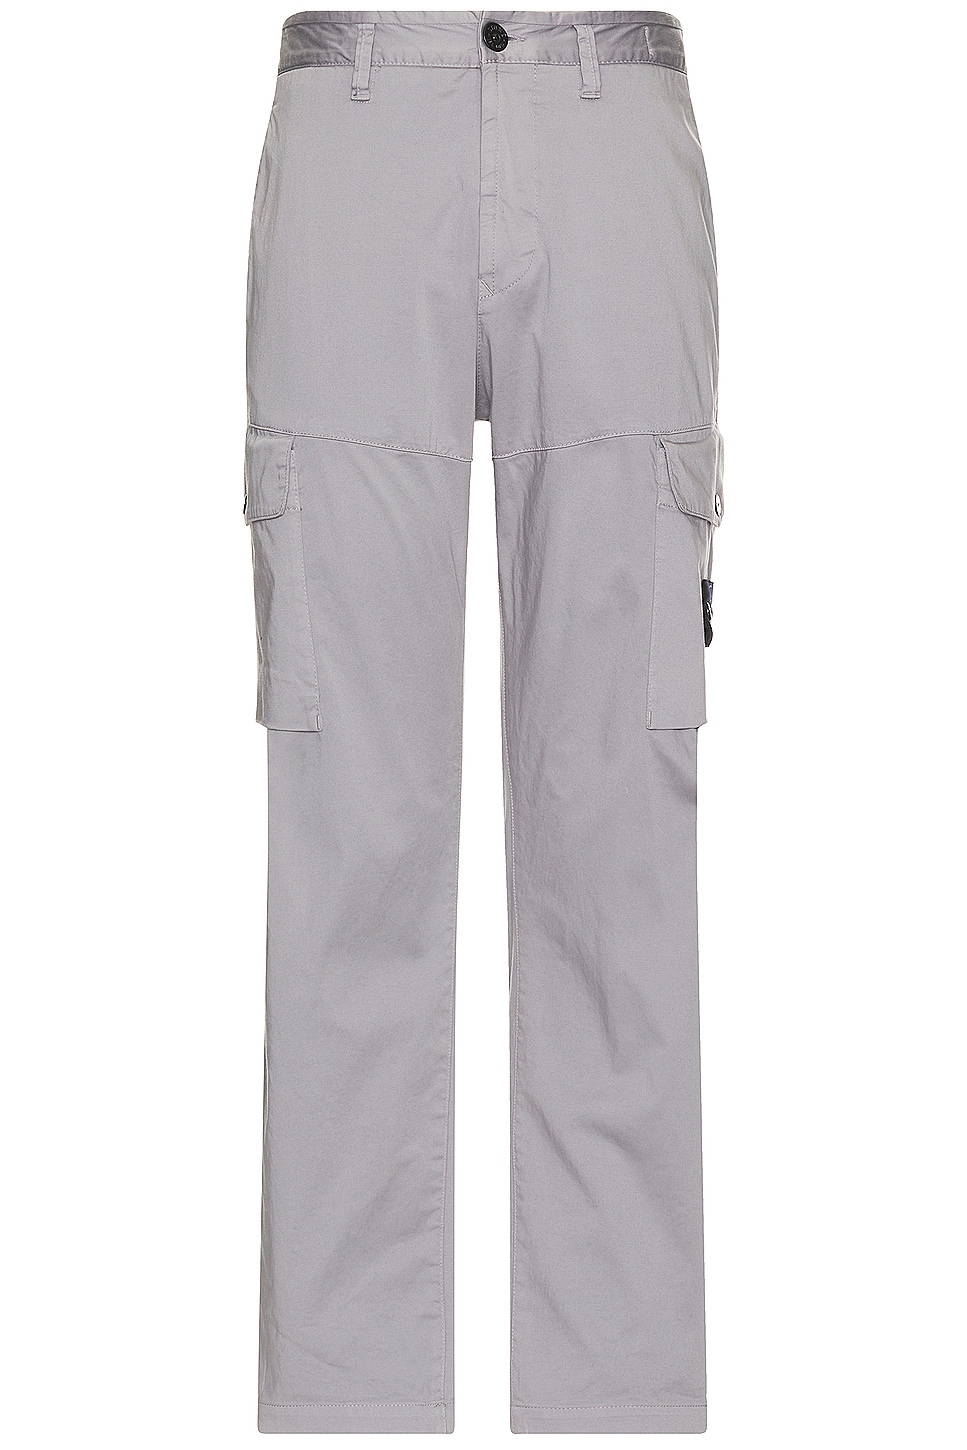 Image 1 of Stone Island Cargo Pants in Dust